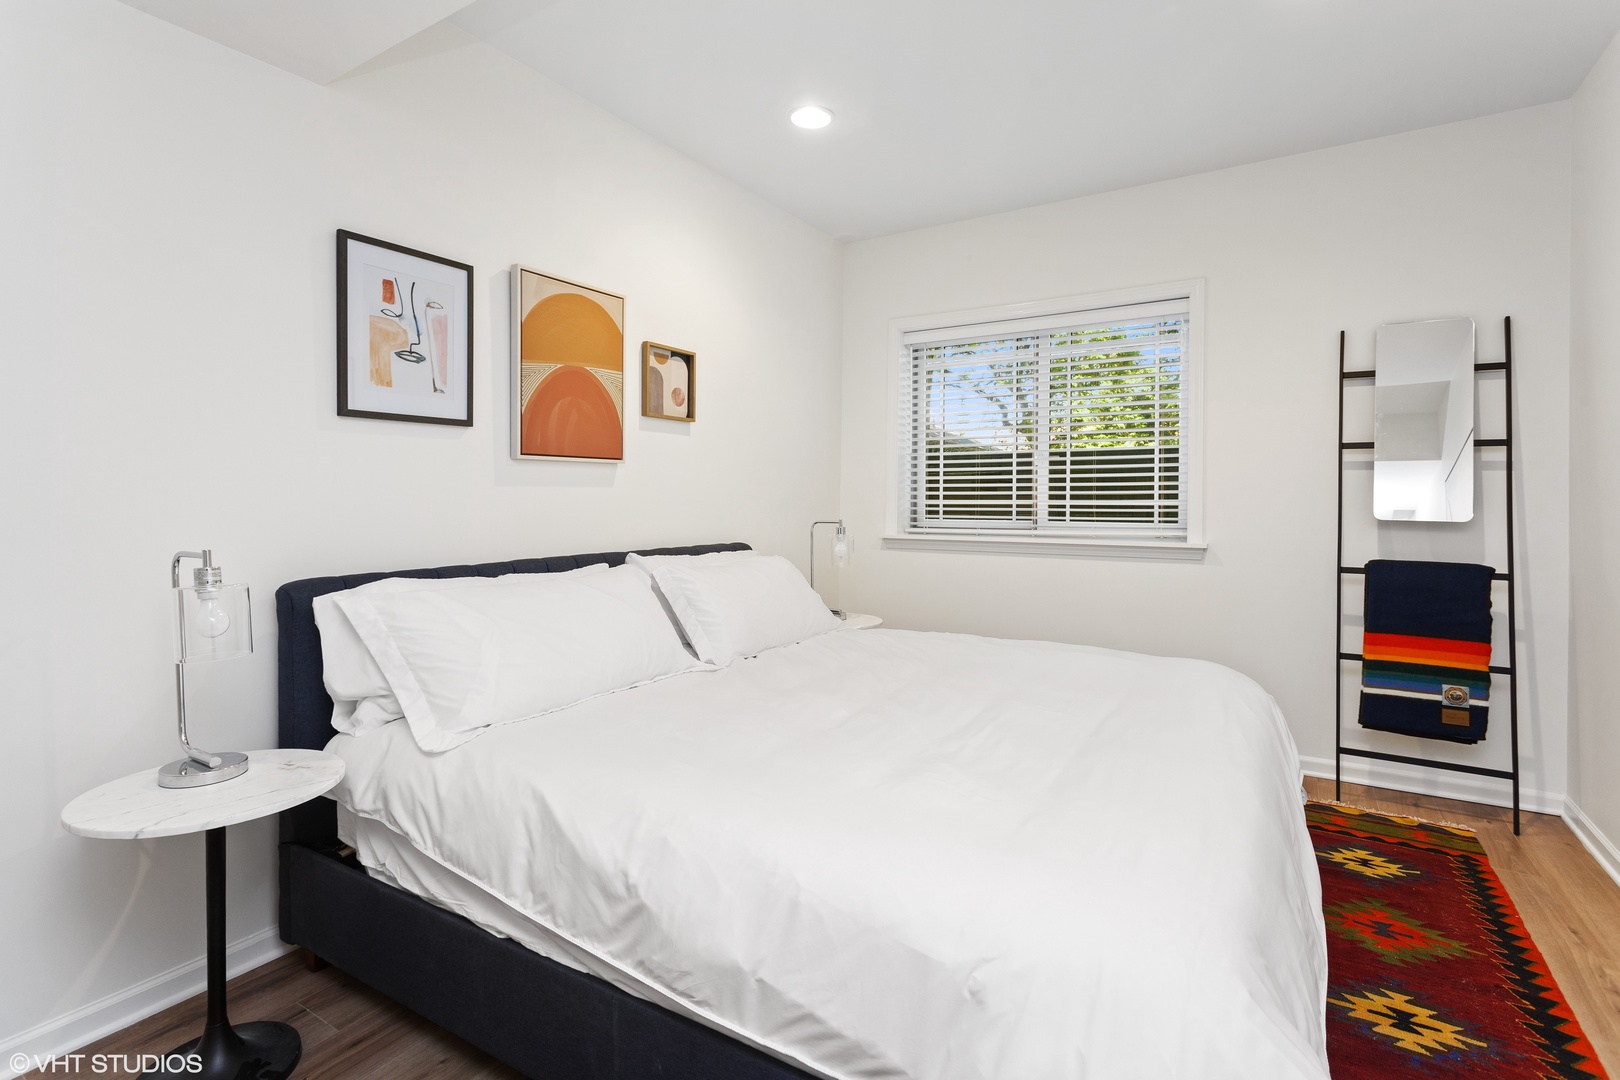 The basement's private king-bedroom is ideal for extended family use or groups traveling together.